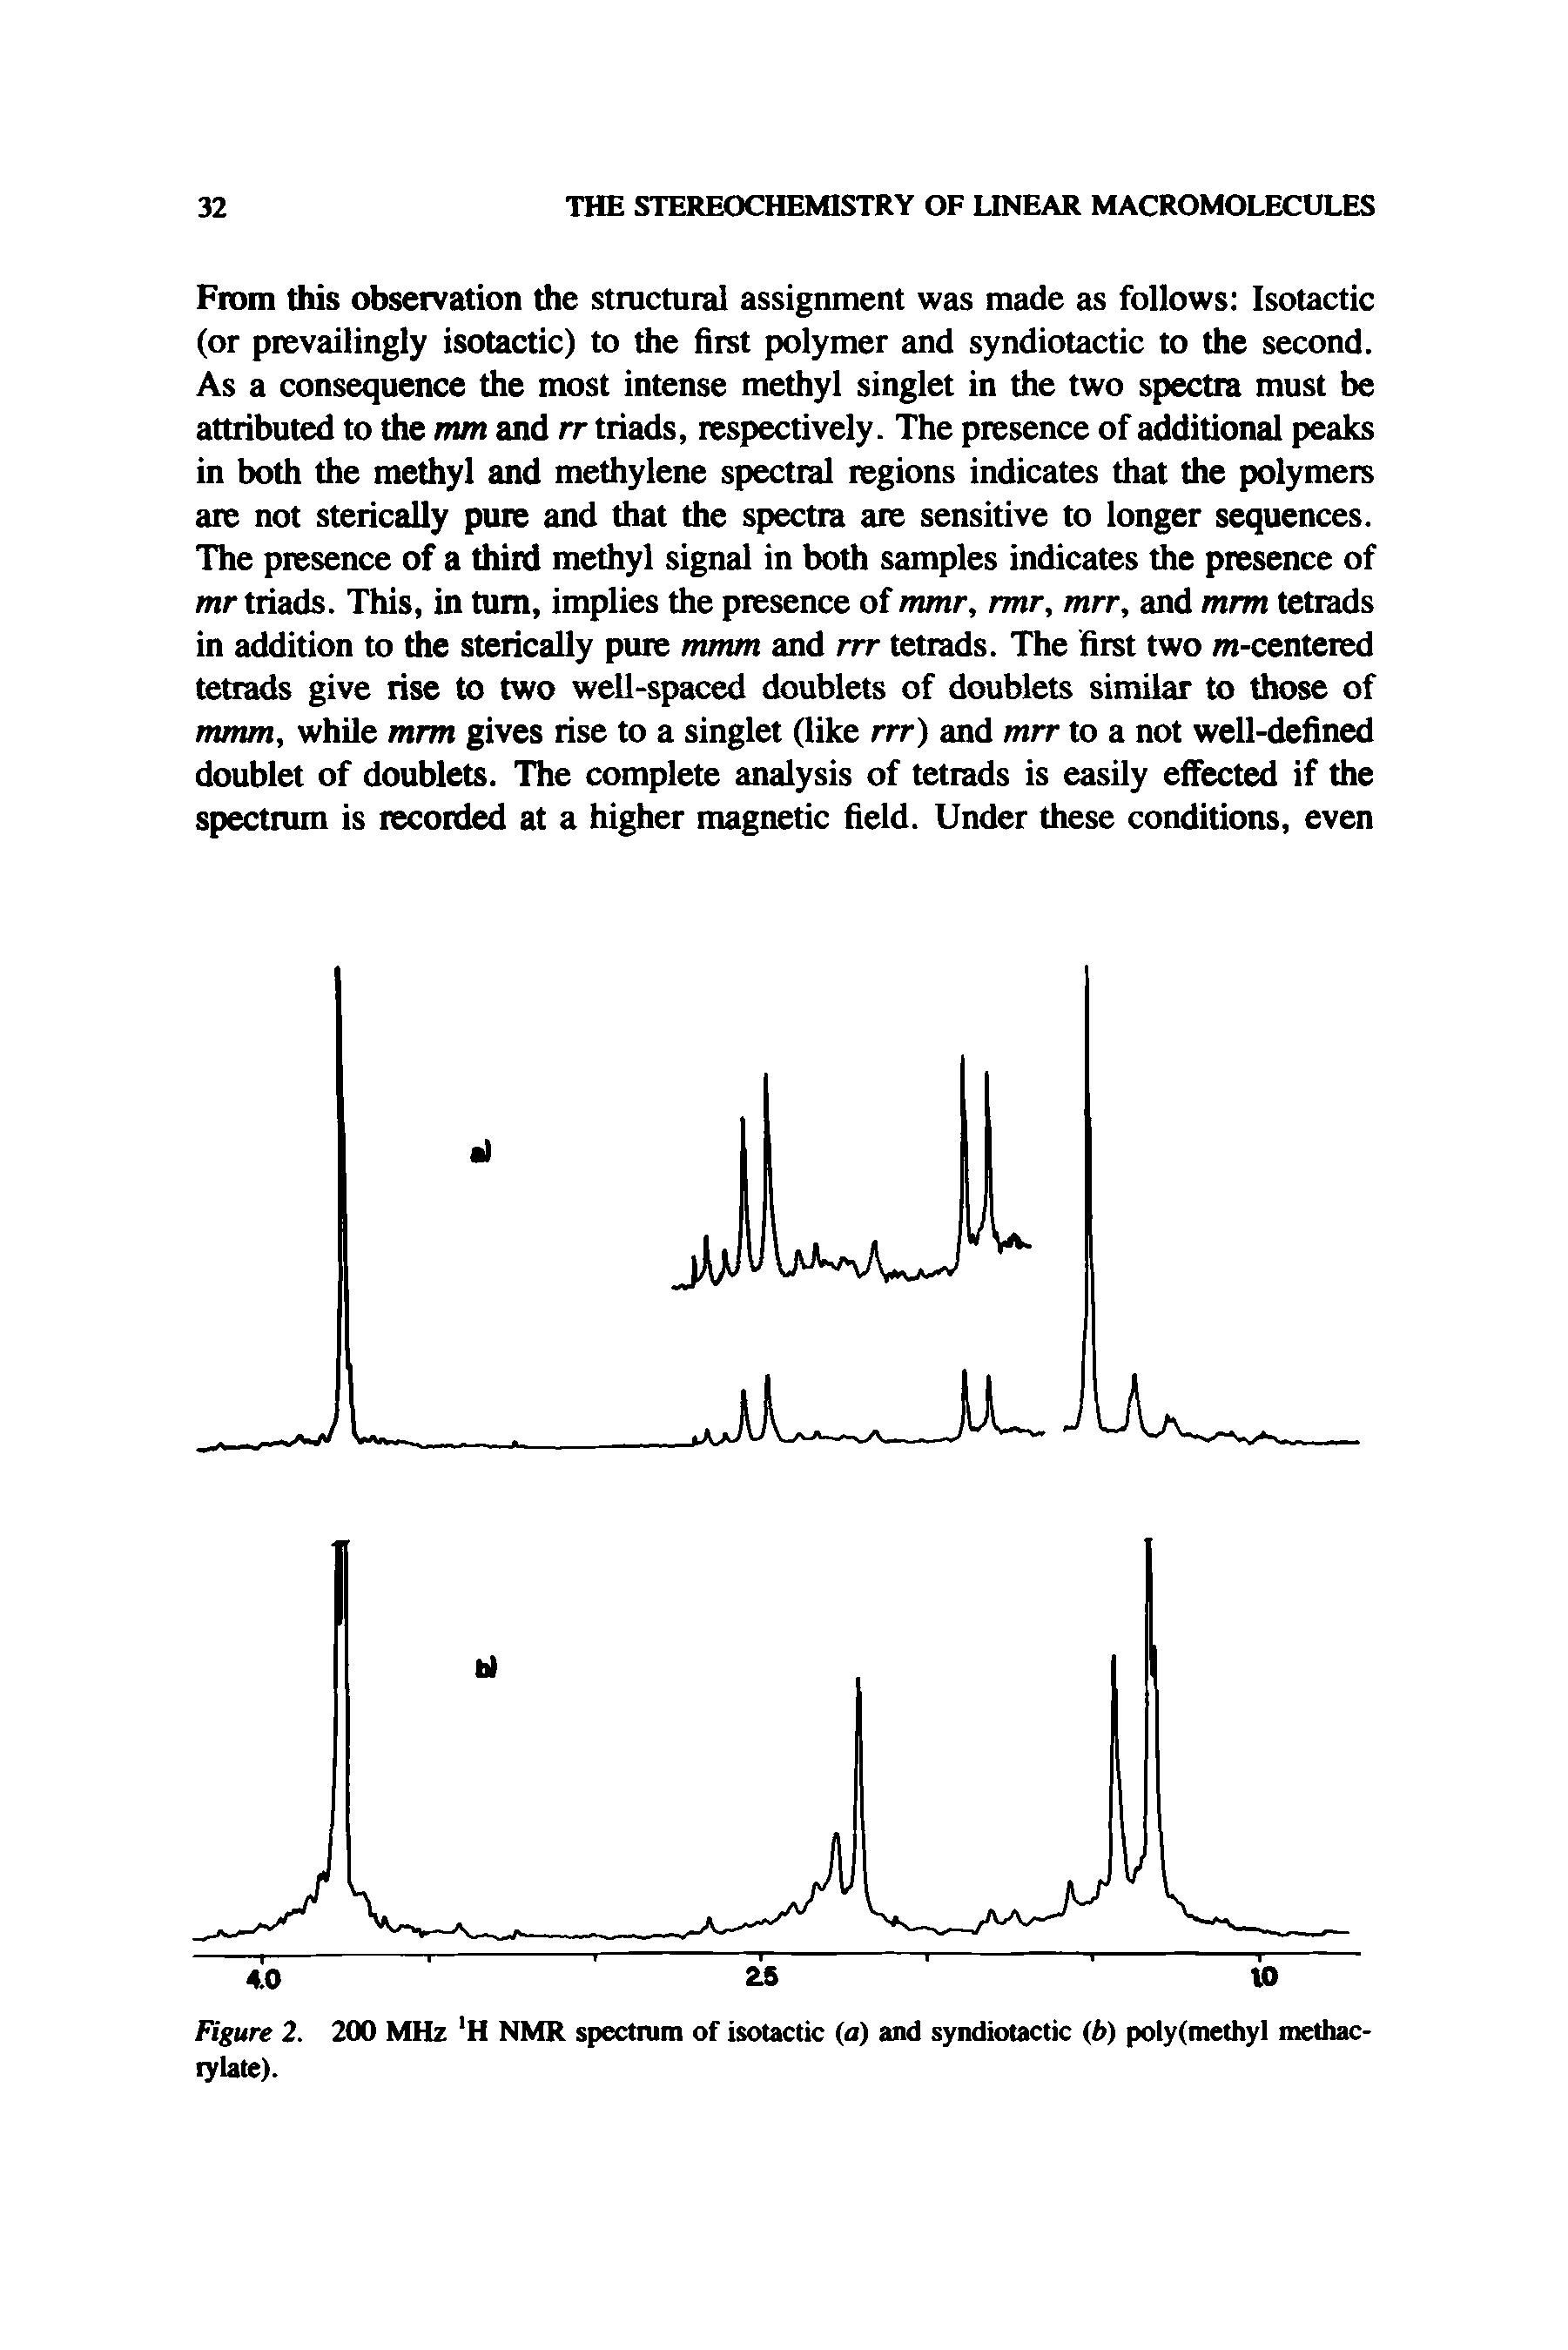 Figure 2. 200 MHz H NMR spectrum of isotactic (a) and syndiotactic (jb) polyfmethyl methac-lylate).